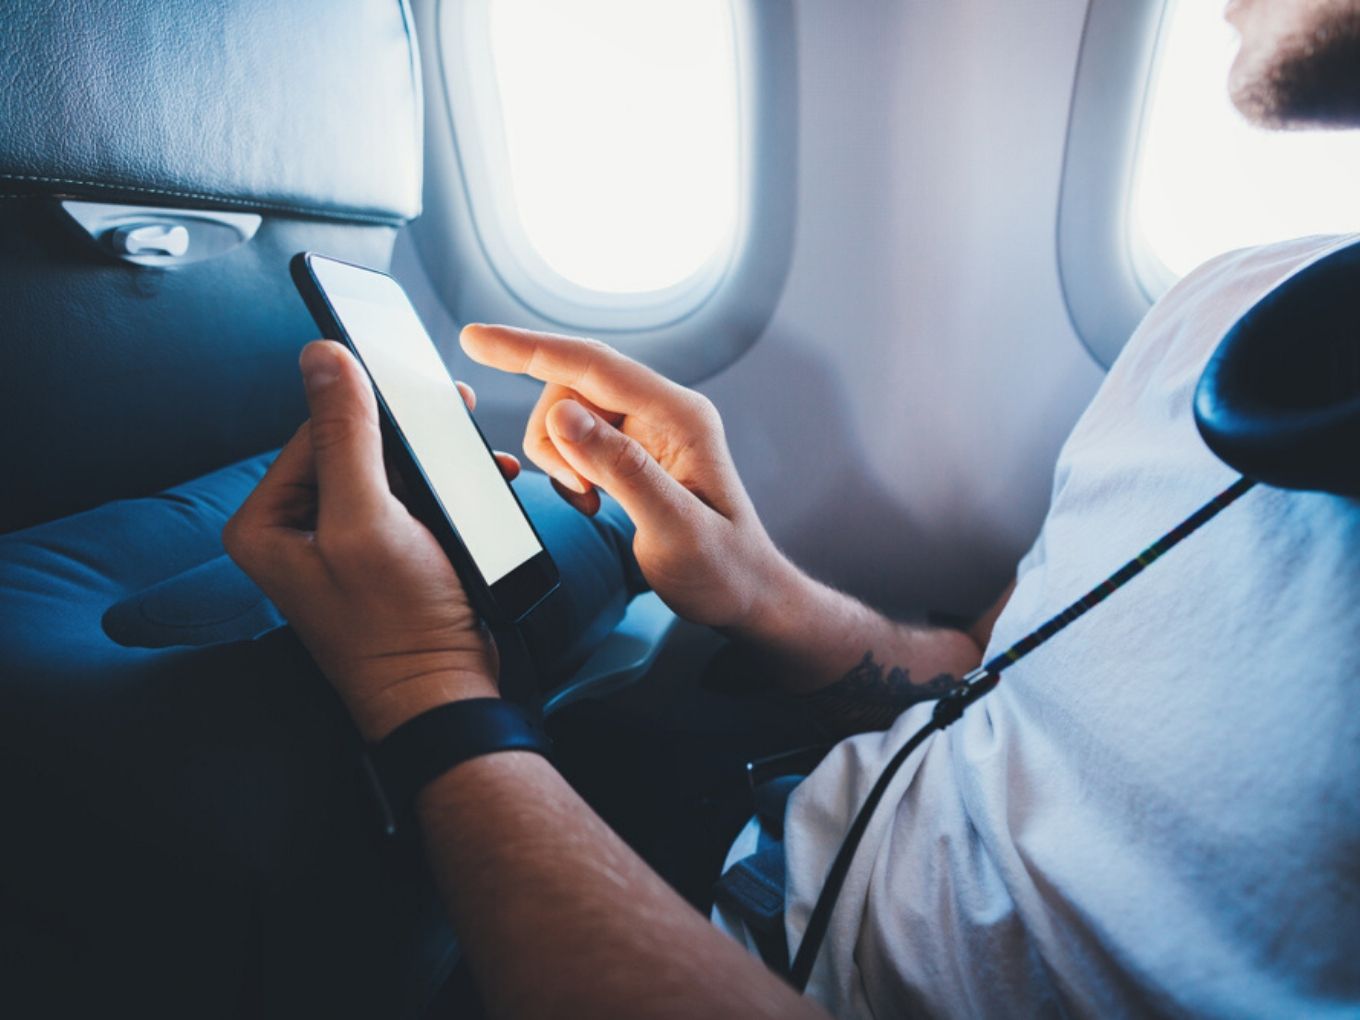 Indian Government Welcomes The Wifi-Enabled Flights